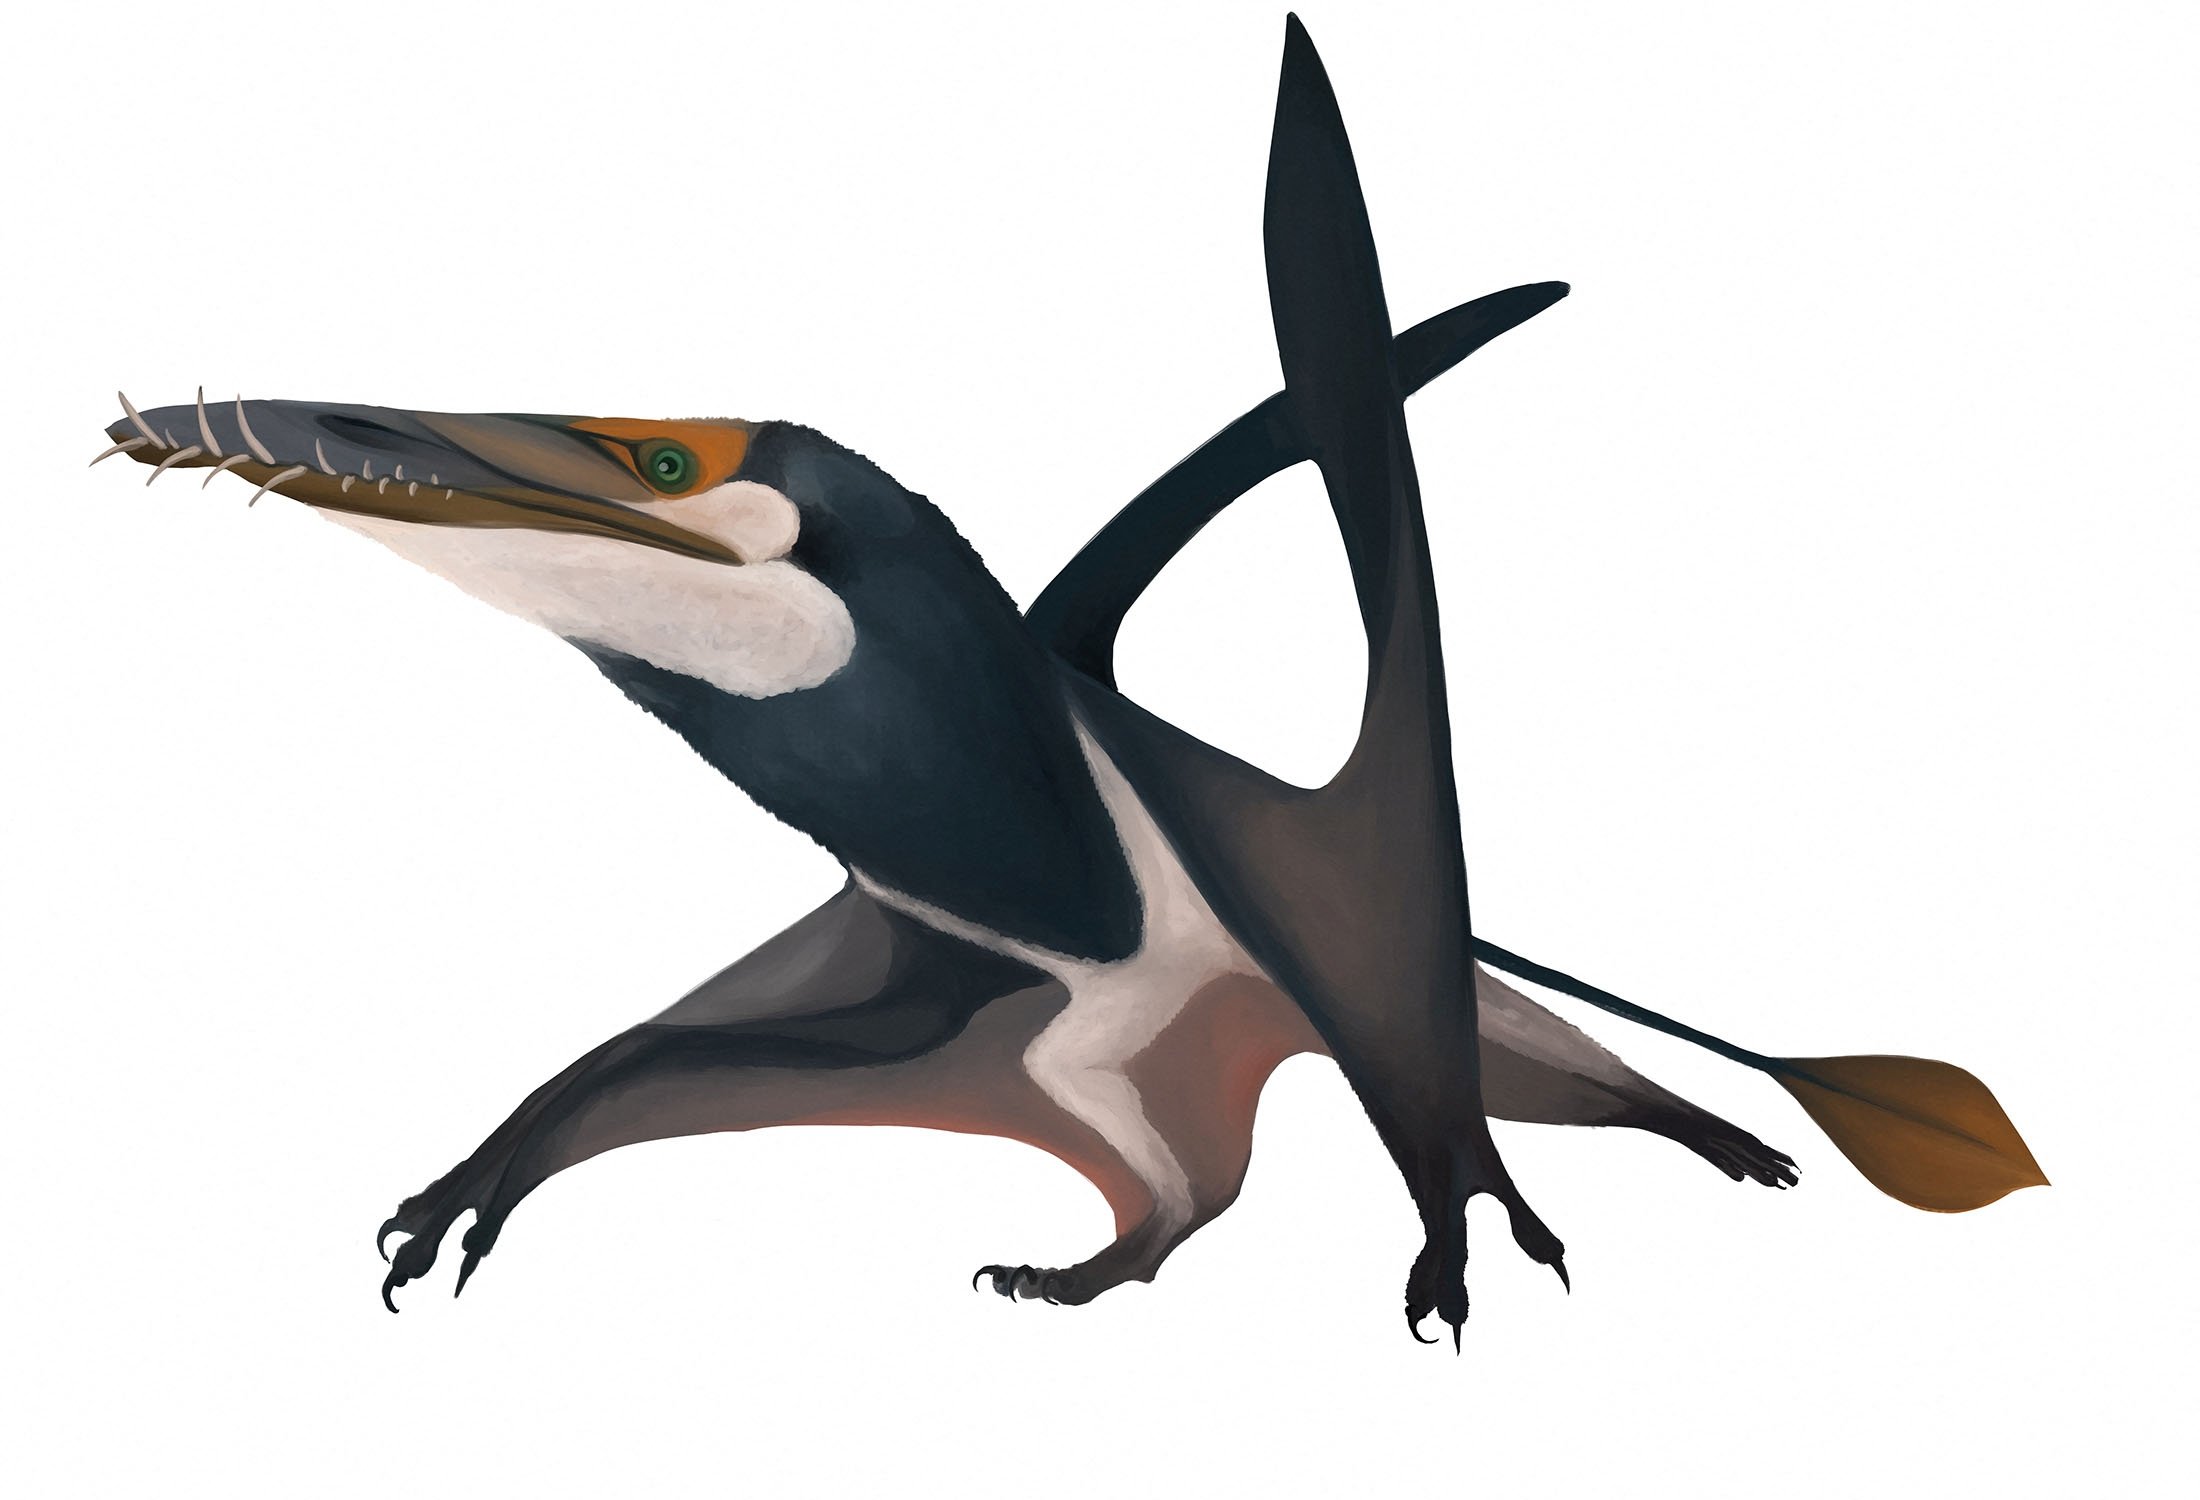 An illustration shows the newly identified Jurassic Period flying reptile, or pterosaur, called 